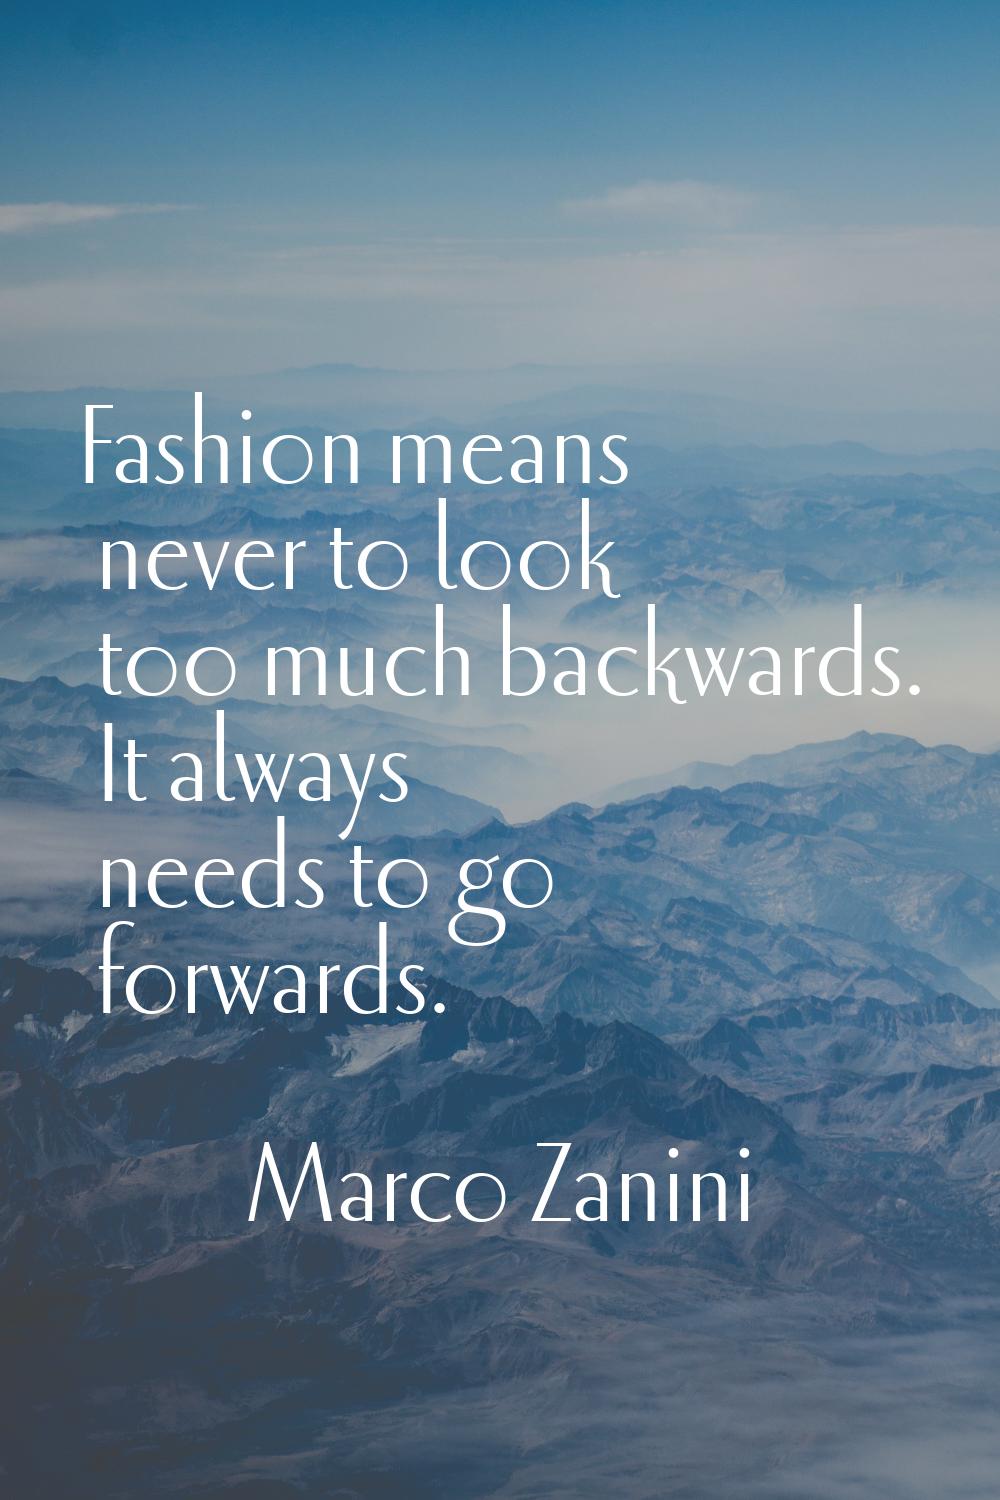 Fashion means never to look too much backwards. It always needs to go forwards.